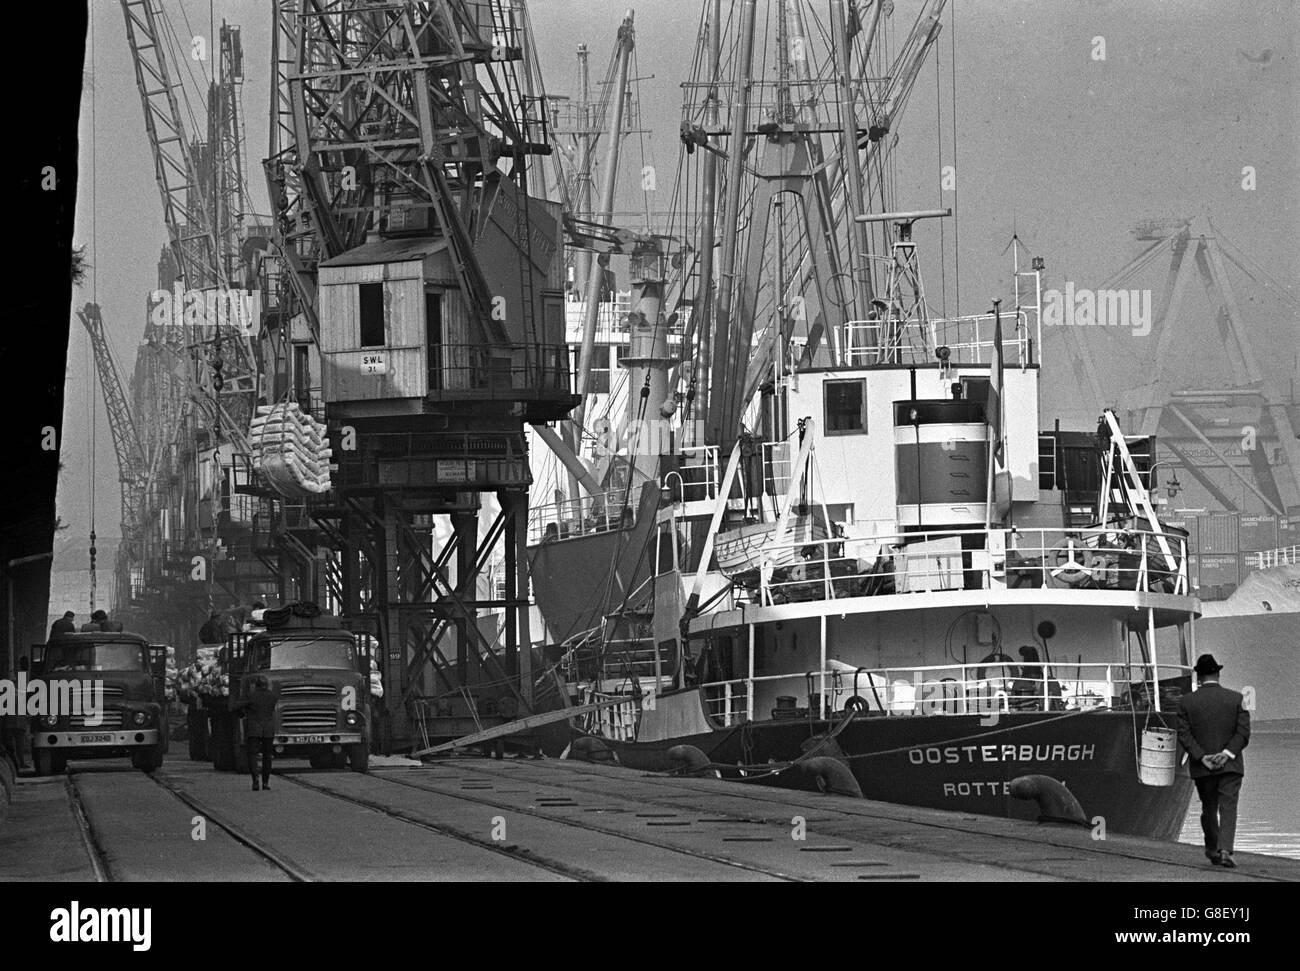 Back at work after the strike, dockers start to tackle the vast backlog of merchandise. Cranes swing into action as lorries waiting on the railway tracks, load up with some of the cargo from the berthed ships. A vessel from Rotterdam is seen in the foreground. Stock Photo